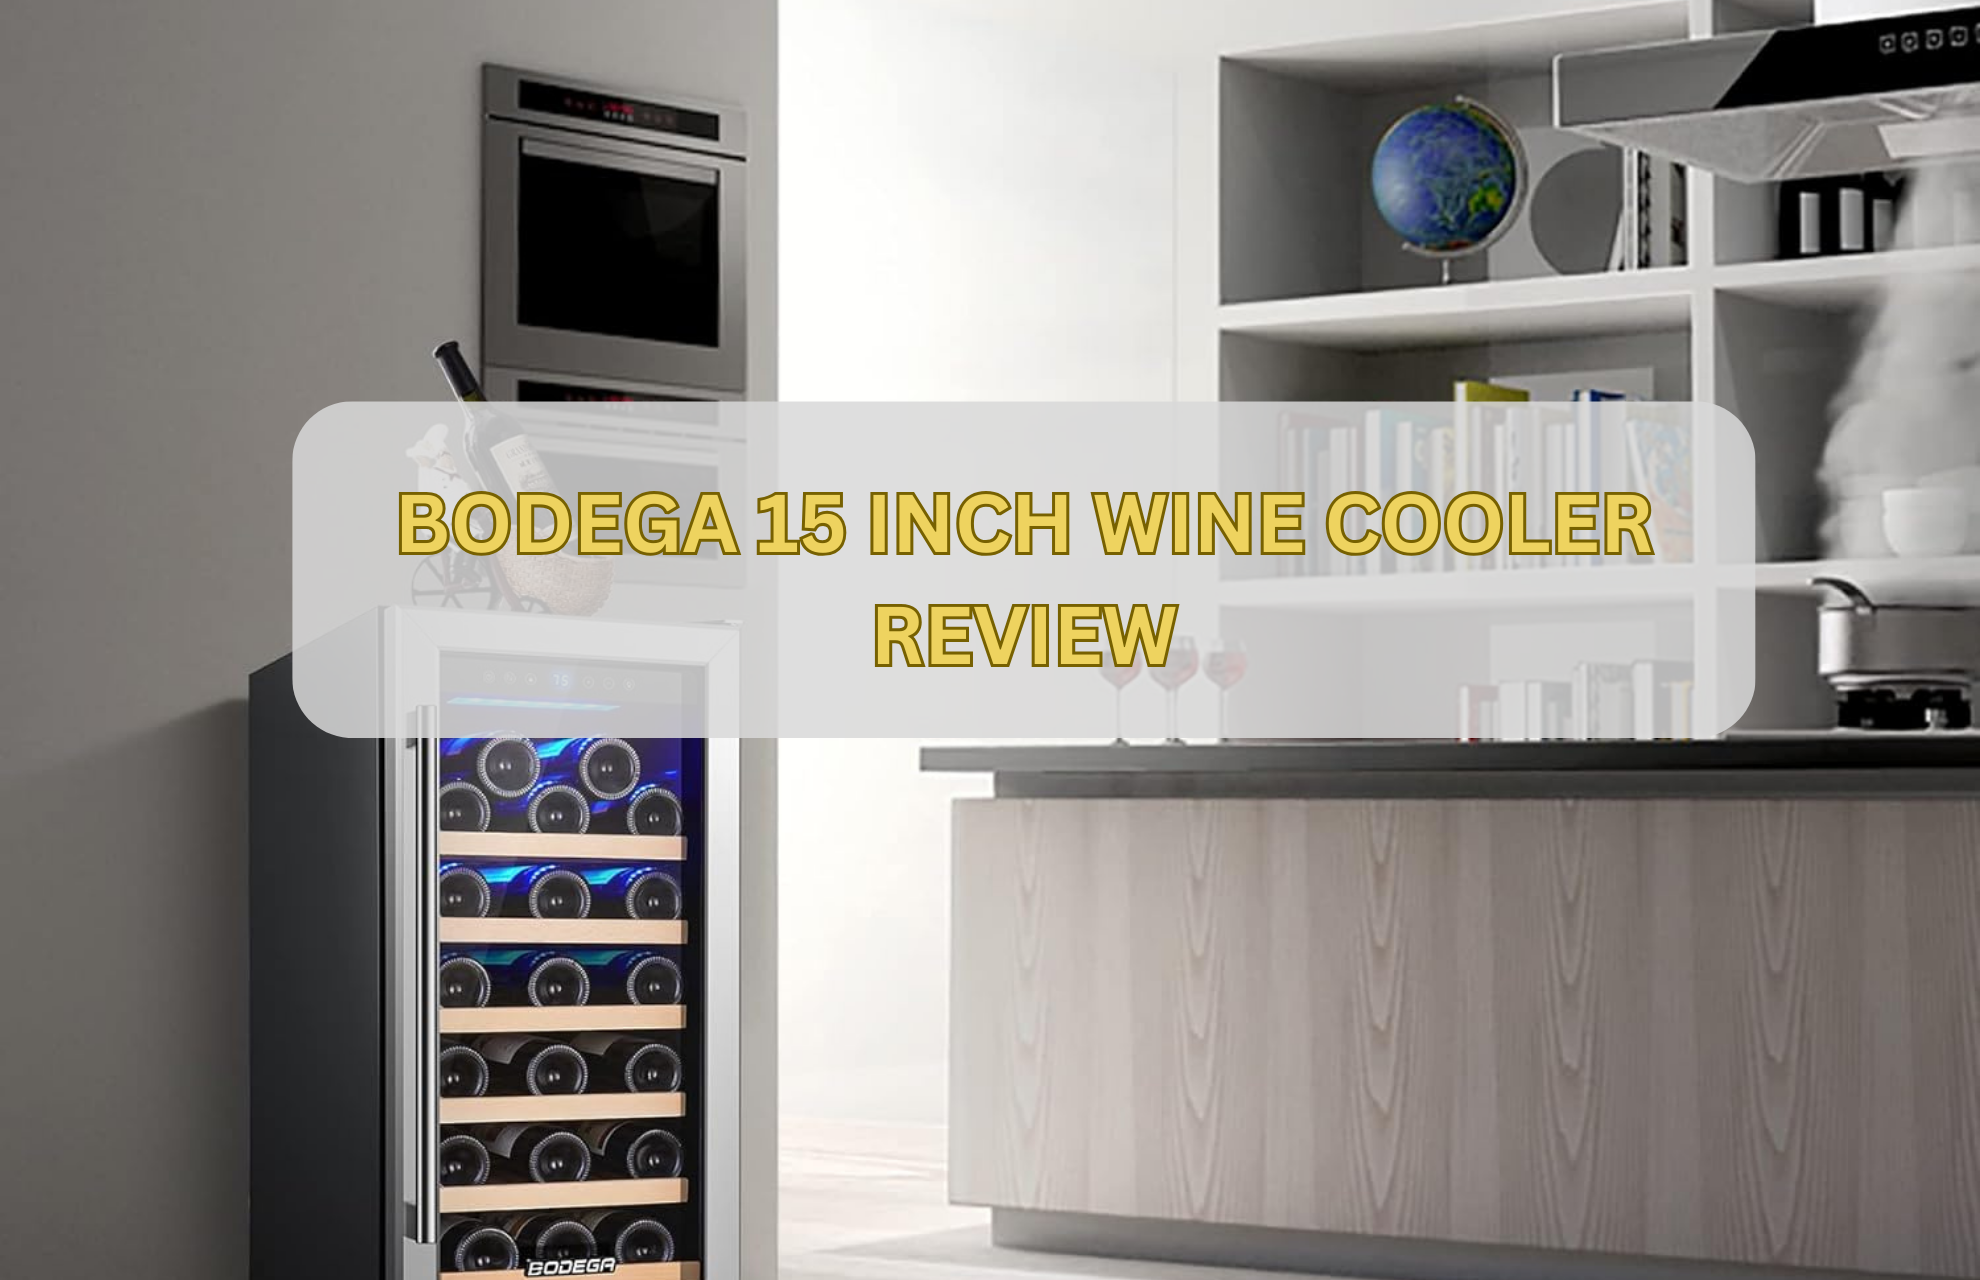 BODEGA 15 INCH WINE COOLER REVIEW